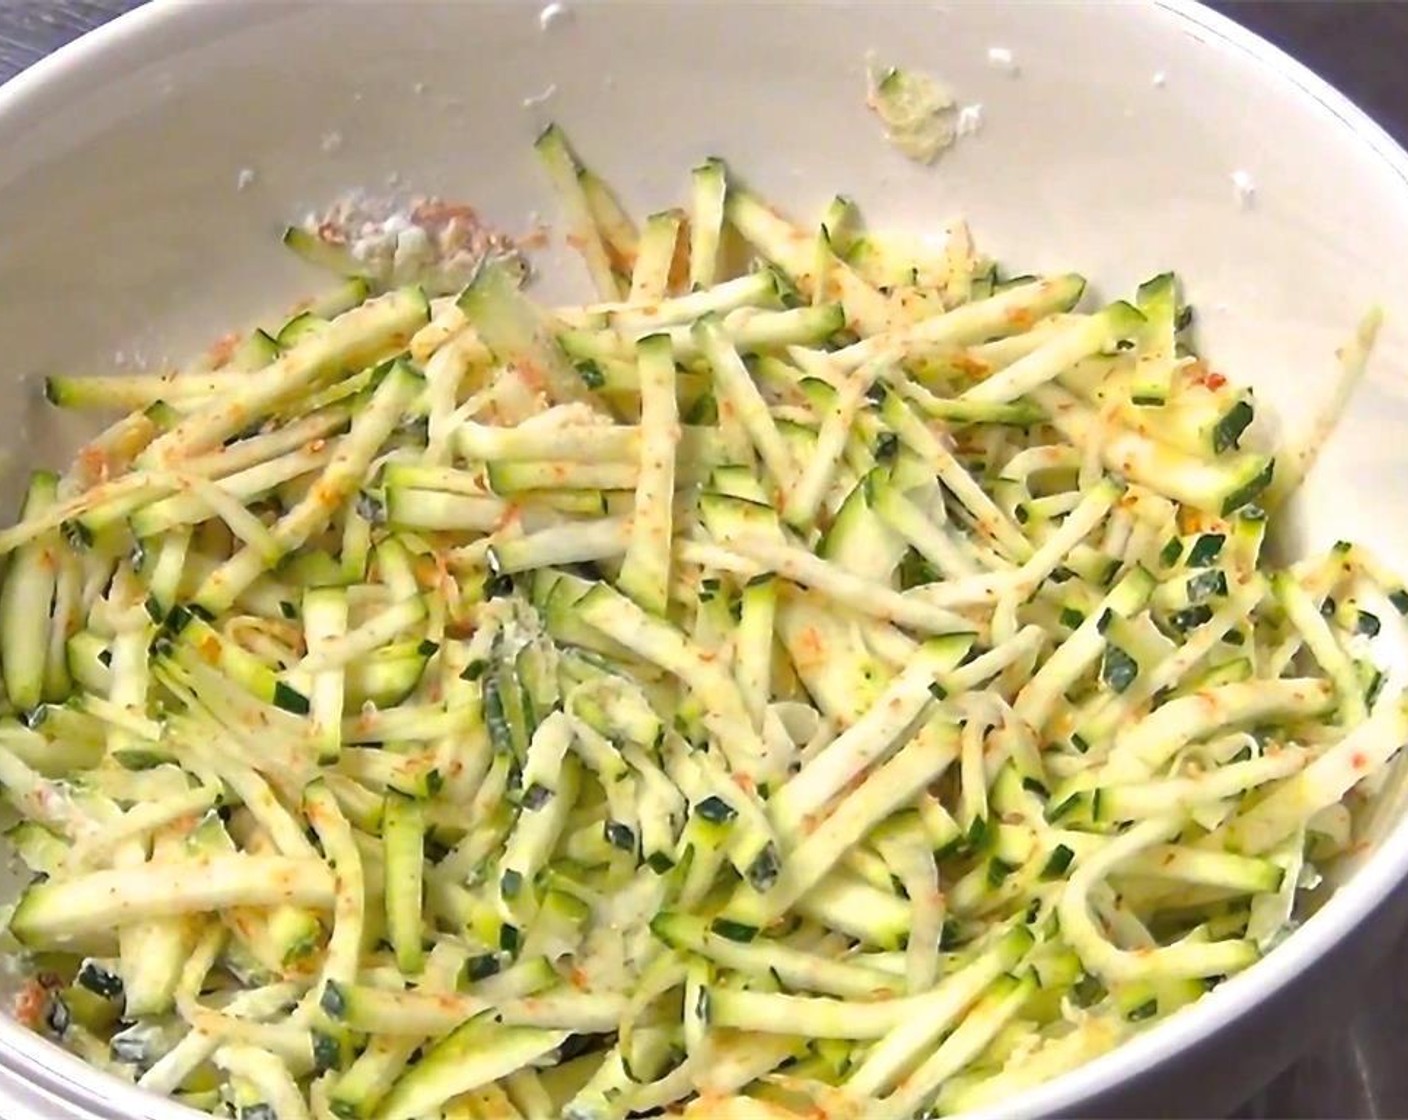 step 3 Let sit 30 minutes to draw the moisture from zucchini.